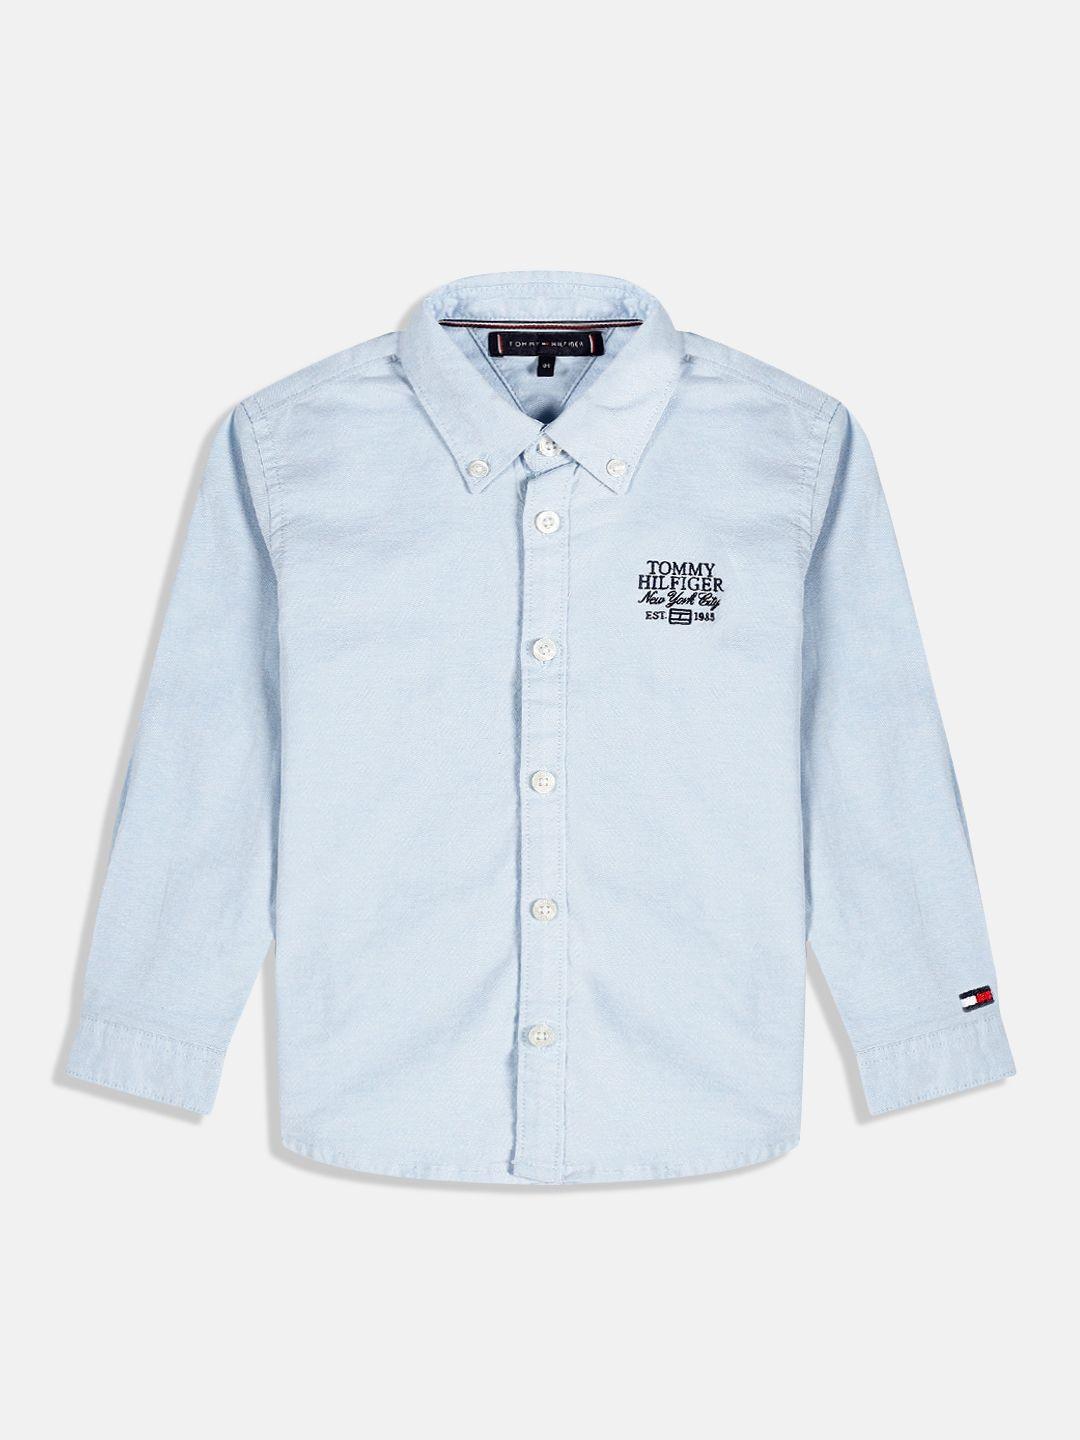 tommy hilfiger boys blue brand logo embroidered pure cotton oxford shirt